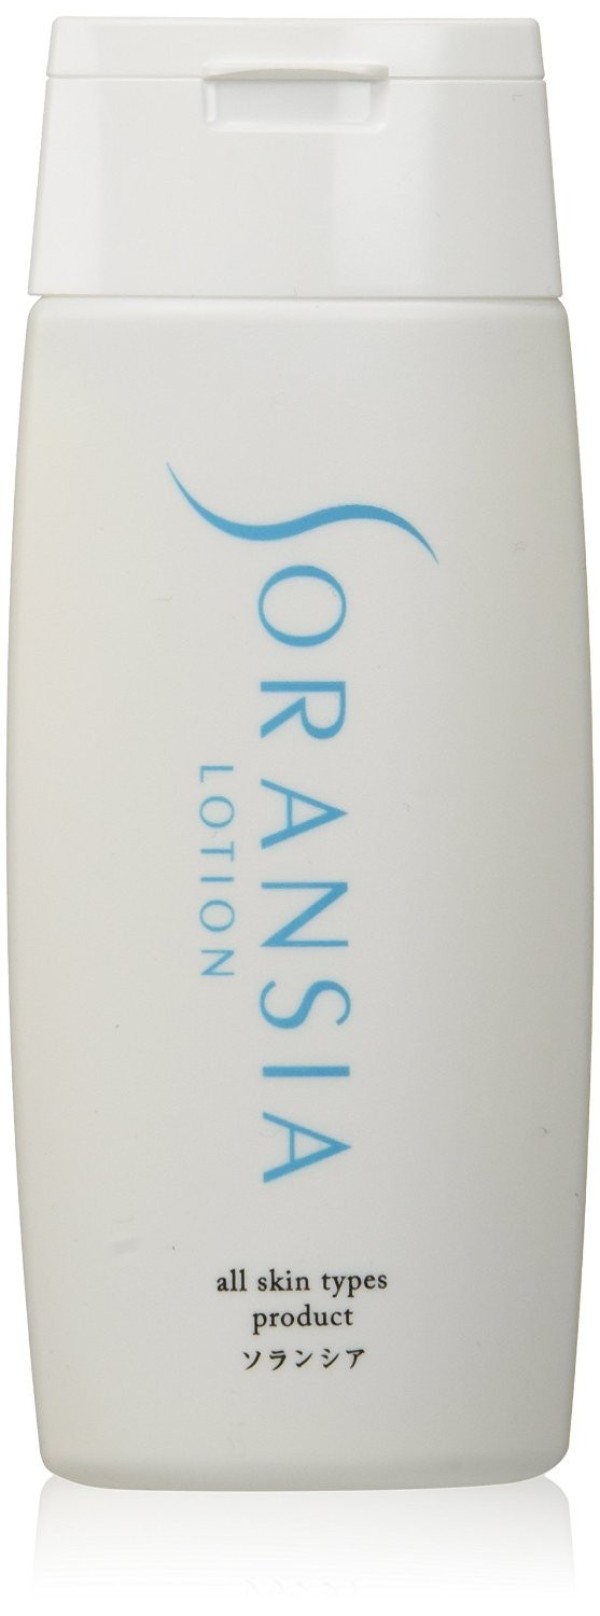 SORANSIA AFTER HAIR REMOVAL LOTION